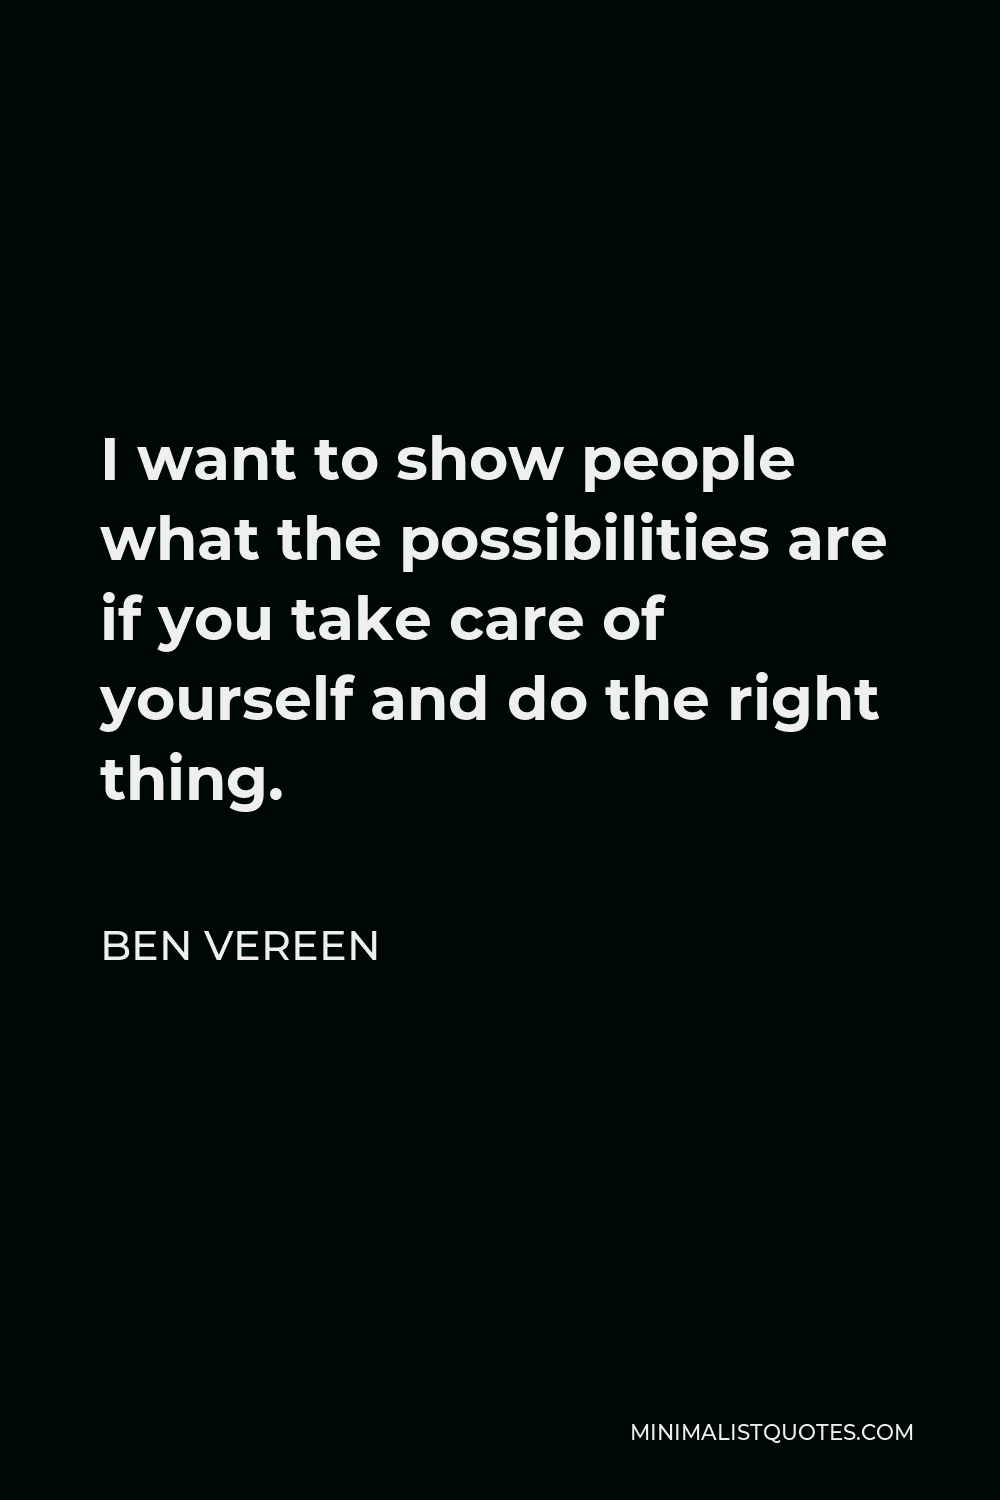 Ben Vereen Quote - I want to show people what the possibilities are if you take care of yourself and do the right thing.